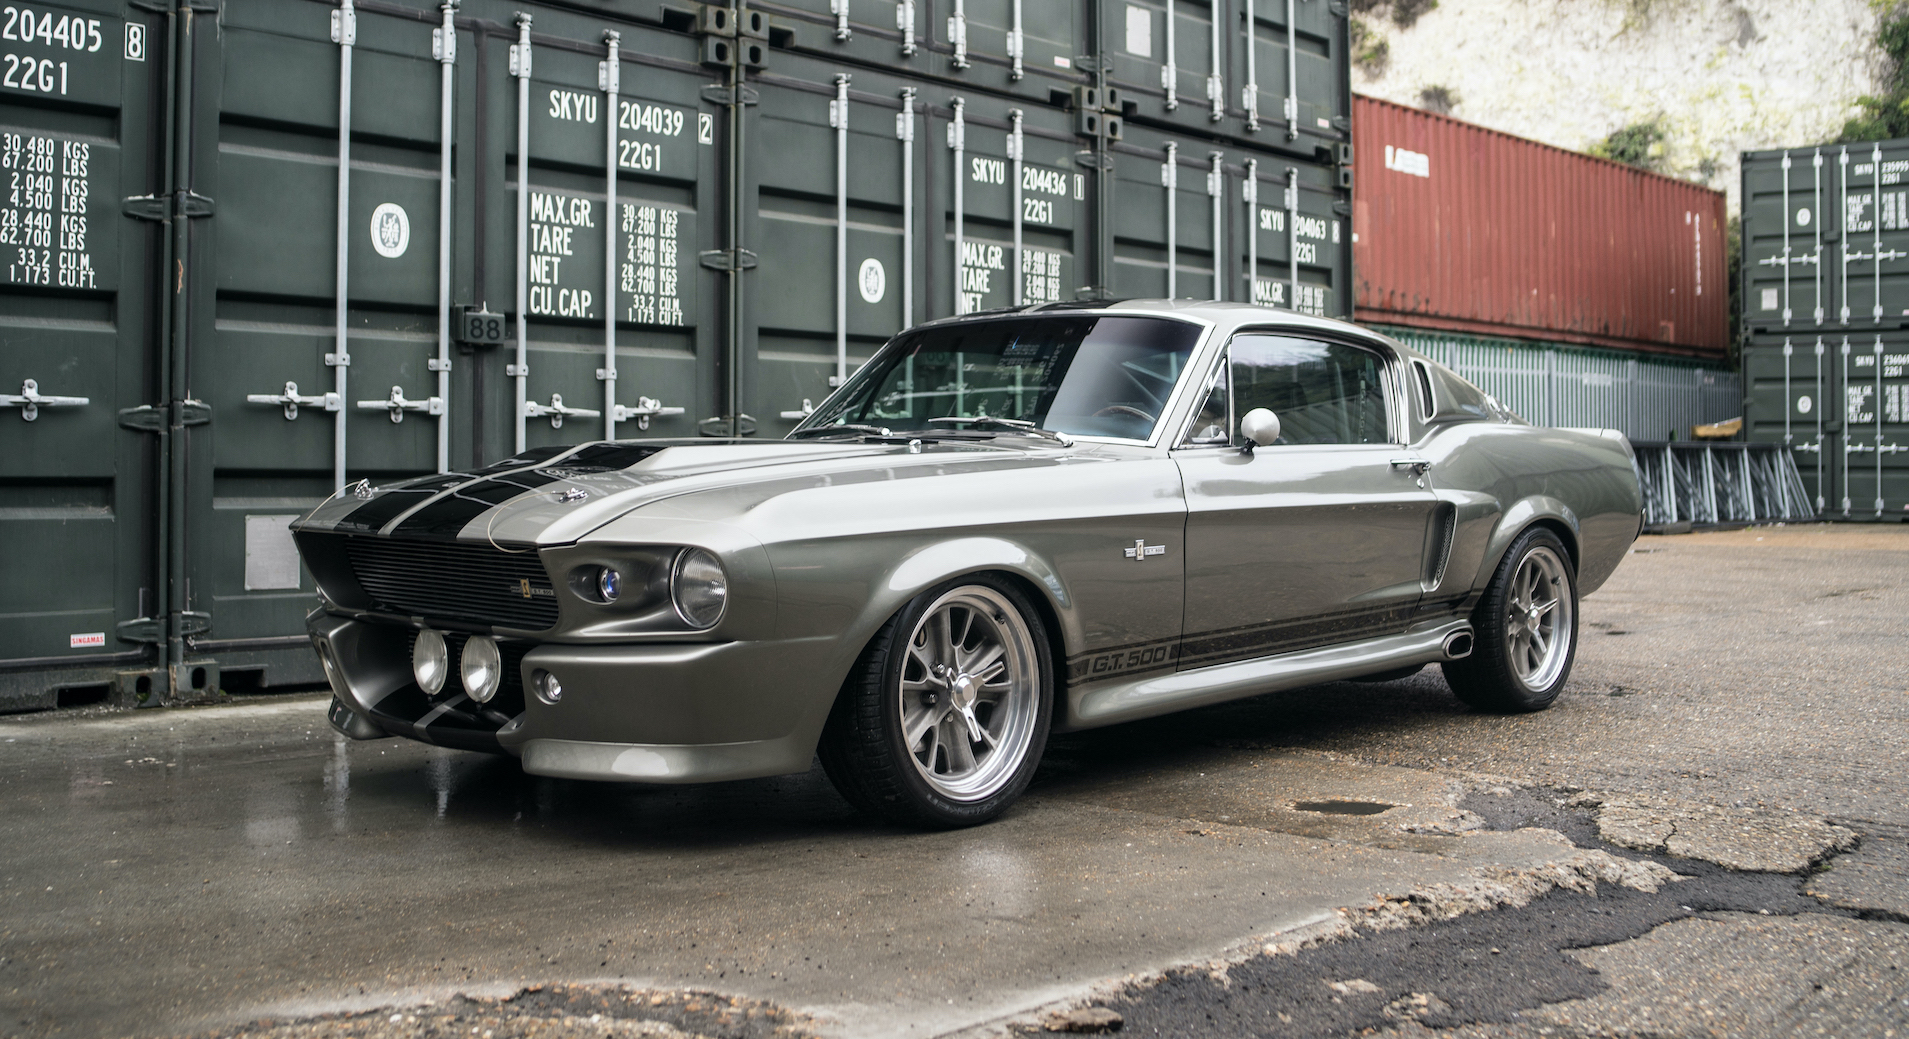 1967 Ford Mustang Shelby GT500 Eleanor Gone in 60 Seconds Muscle Street Rod  Machine USA 4288x284819 wallpaper  4288x2848  653487  WallpaperUP